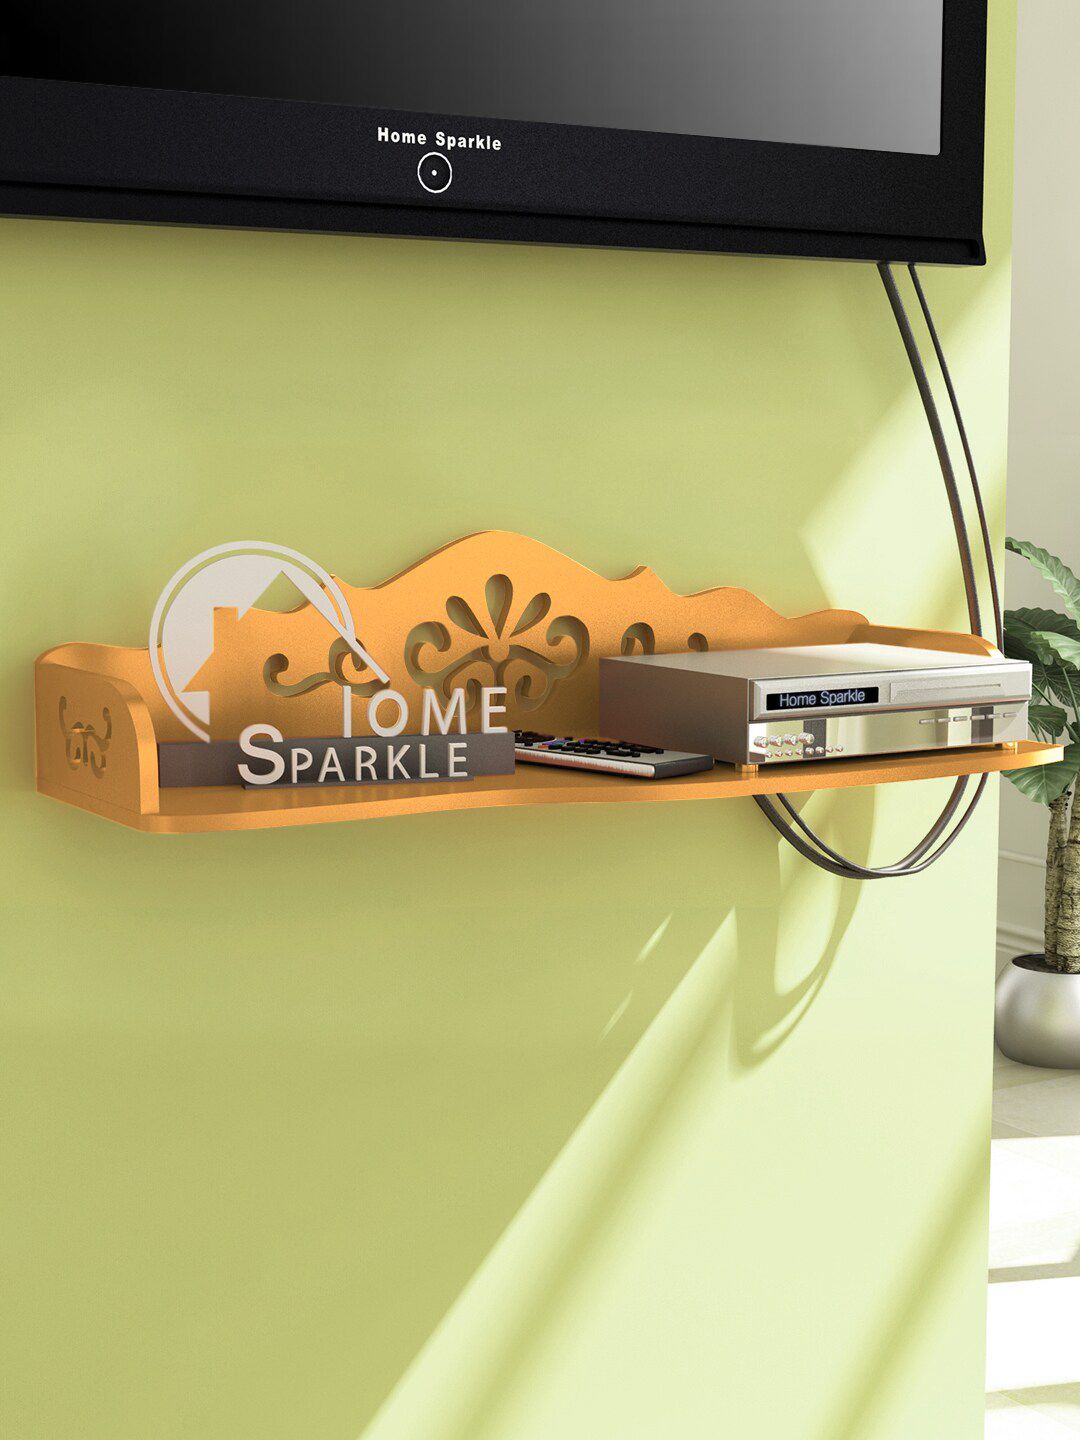 Home Sparkle Gold-Toned Wood Set Top Box Holder & WiFi-Modem Holder Wall Shelf Price in India